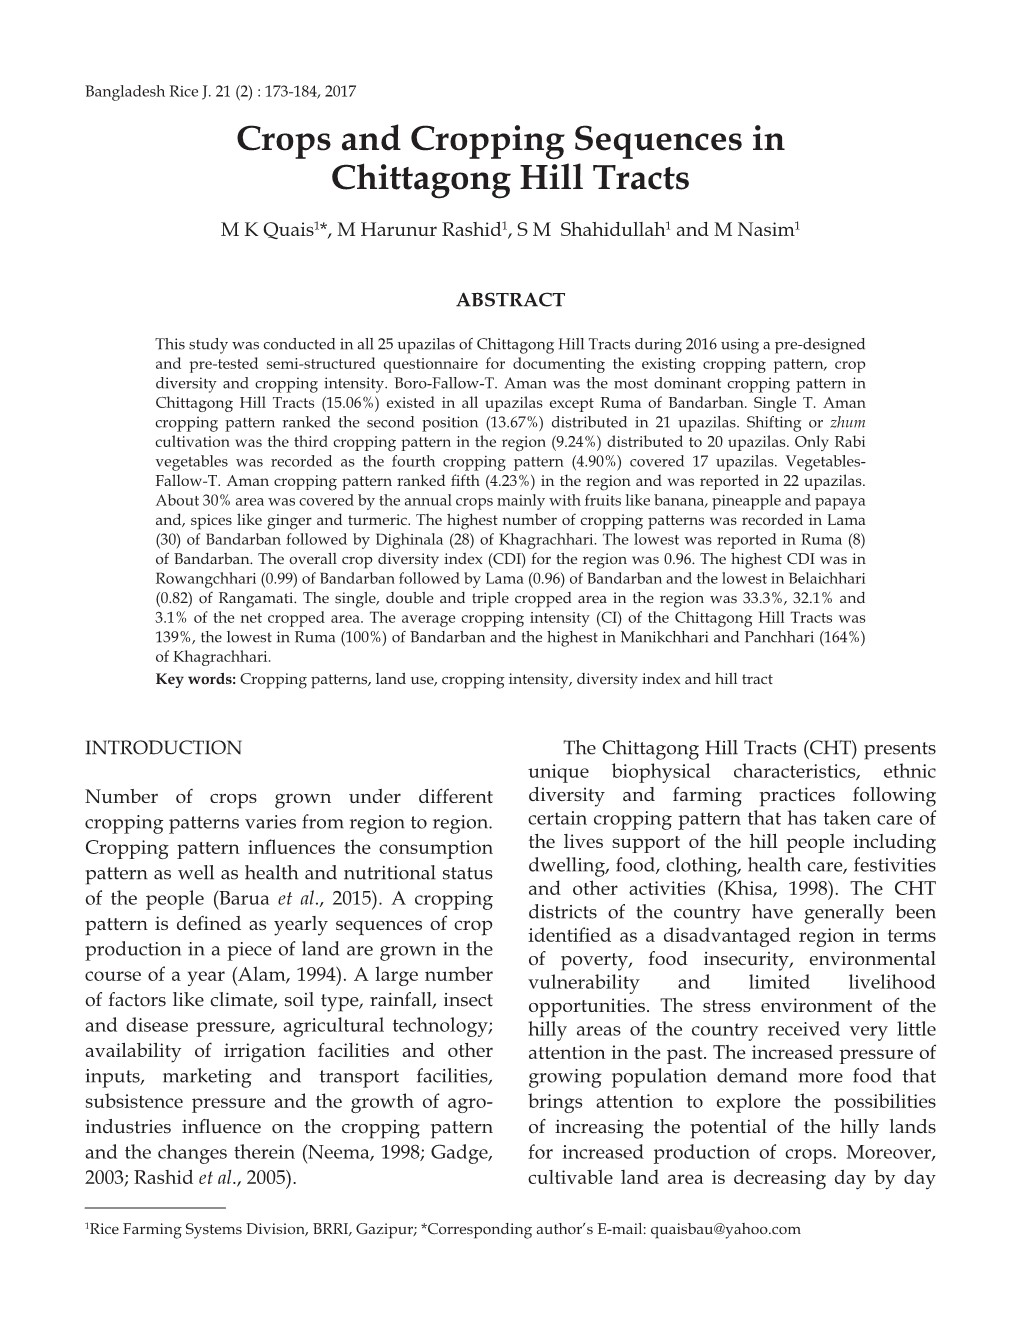 Crops and Cropping Sequences in Chittagong Hill Tracts